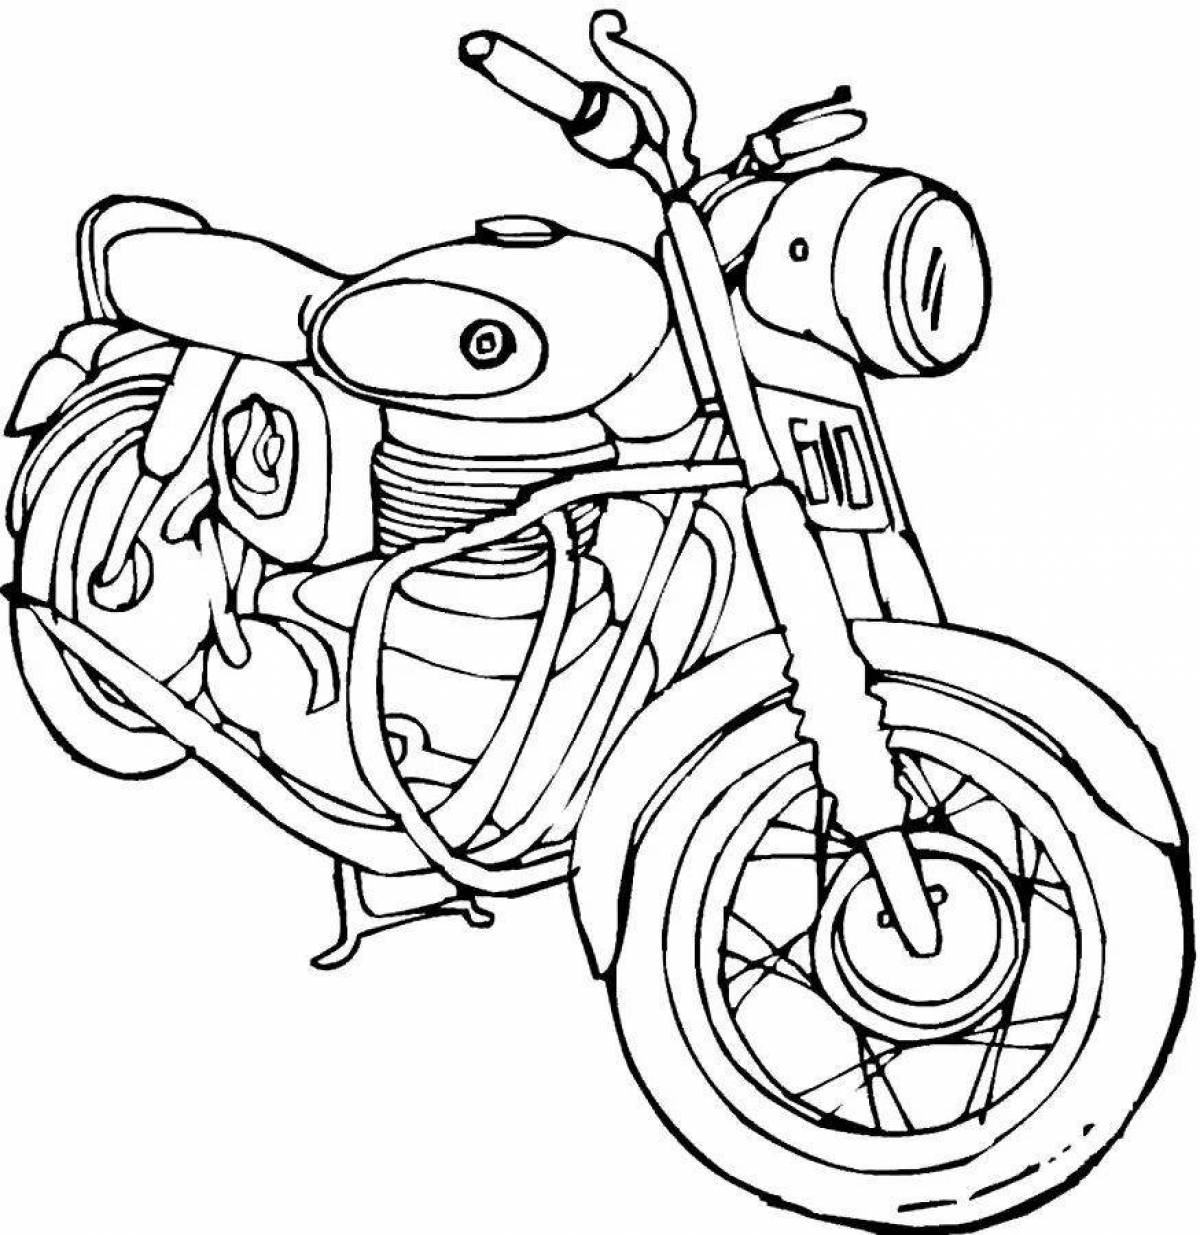 Gorgeous moped coloring page